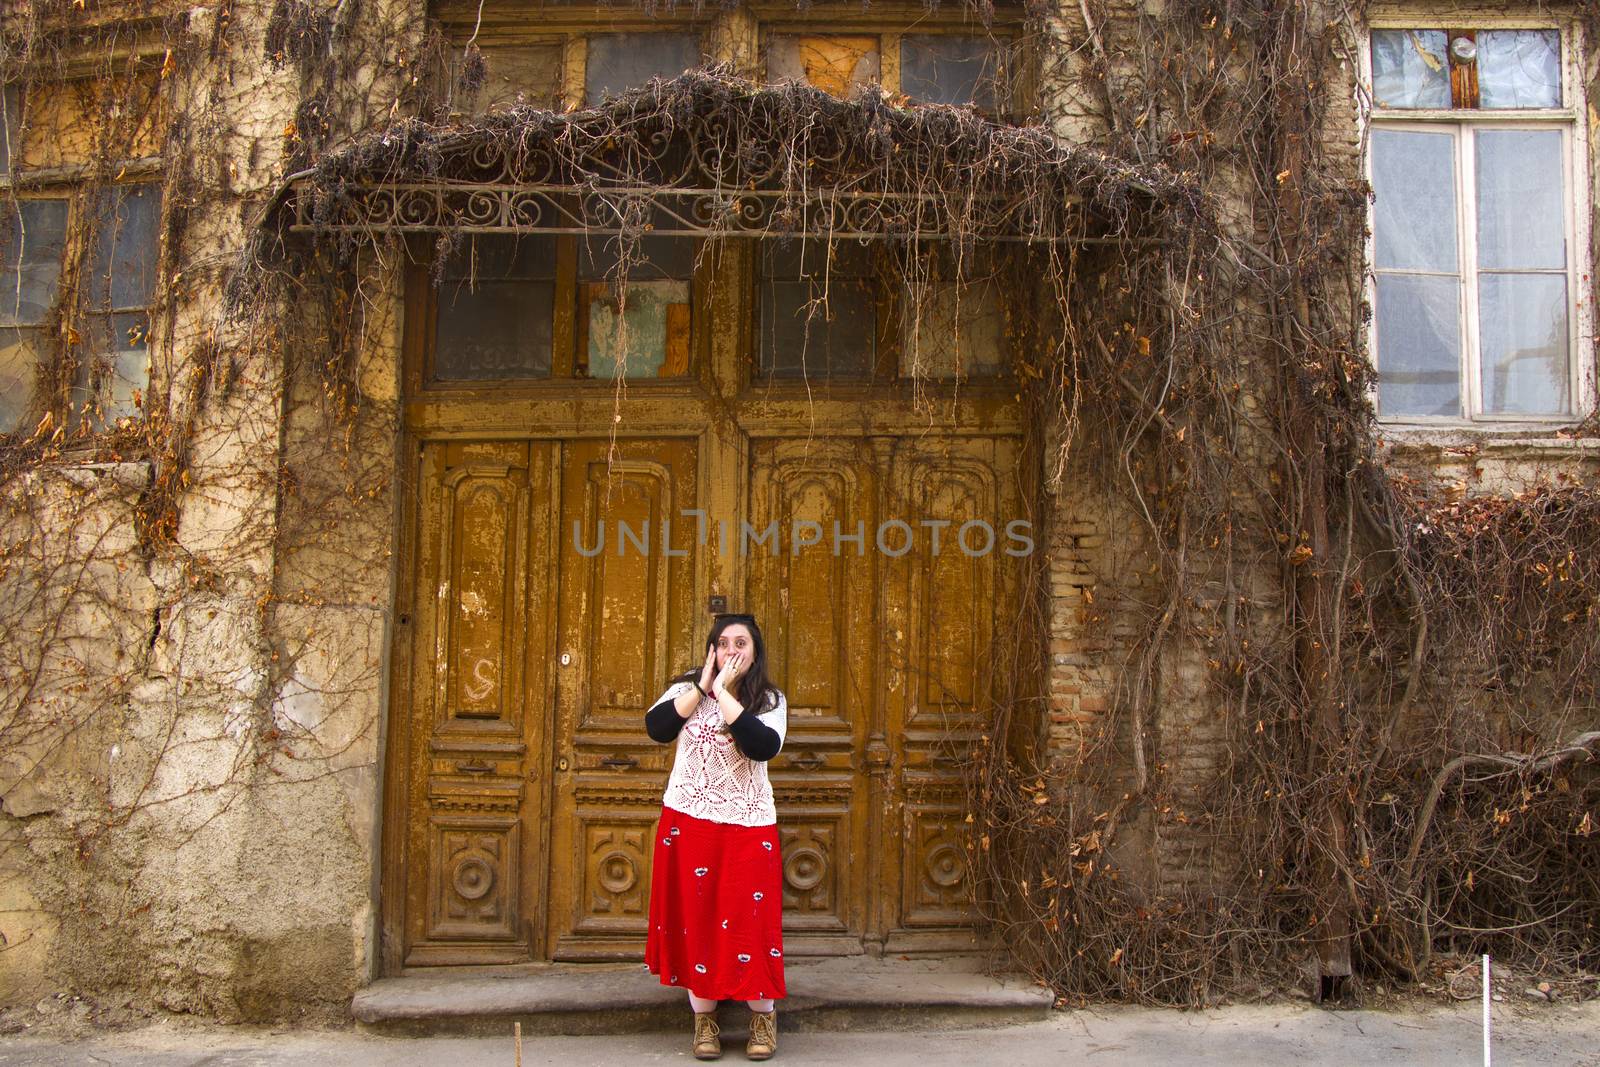 Young woman portrait, beautiful girl on the building and architecture door background. Tourist scene. by Taidundua